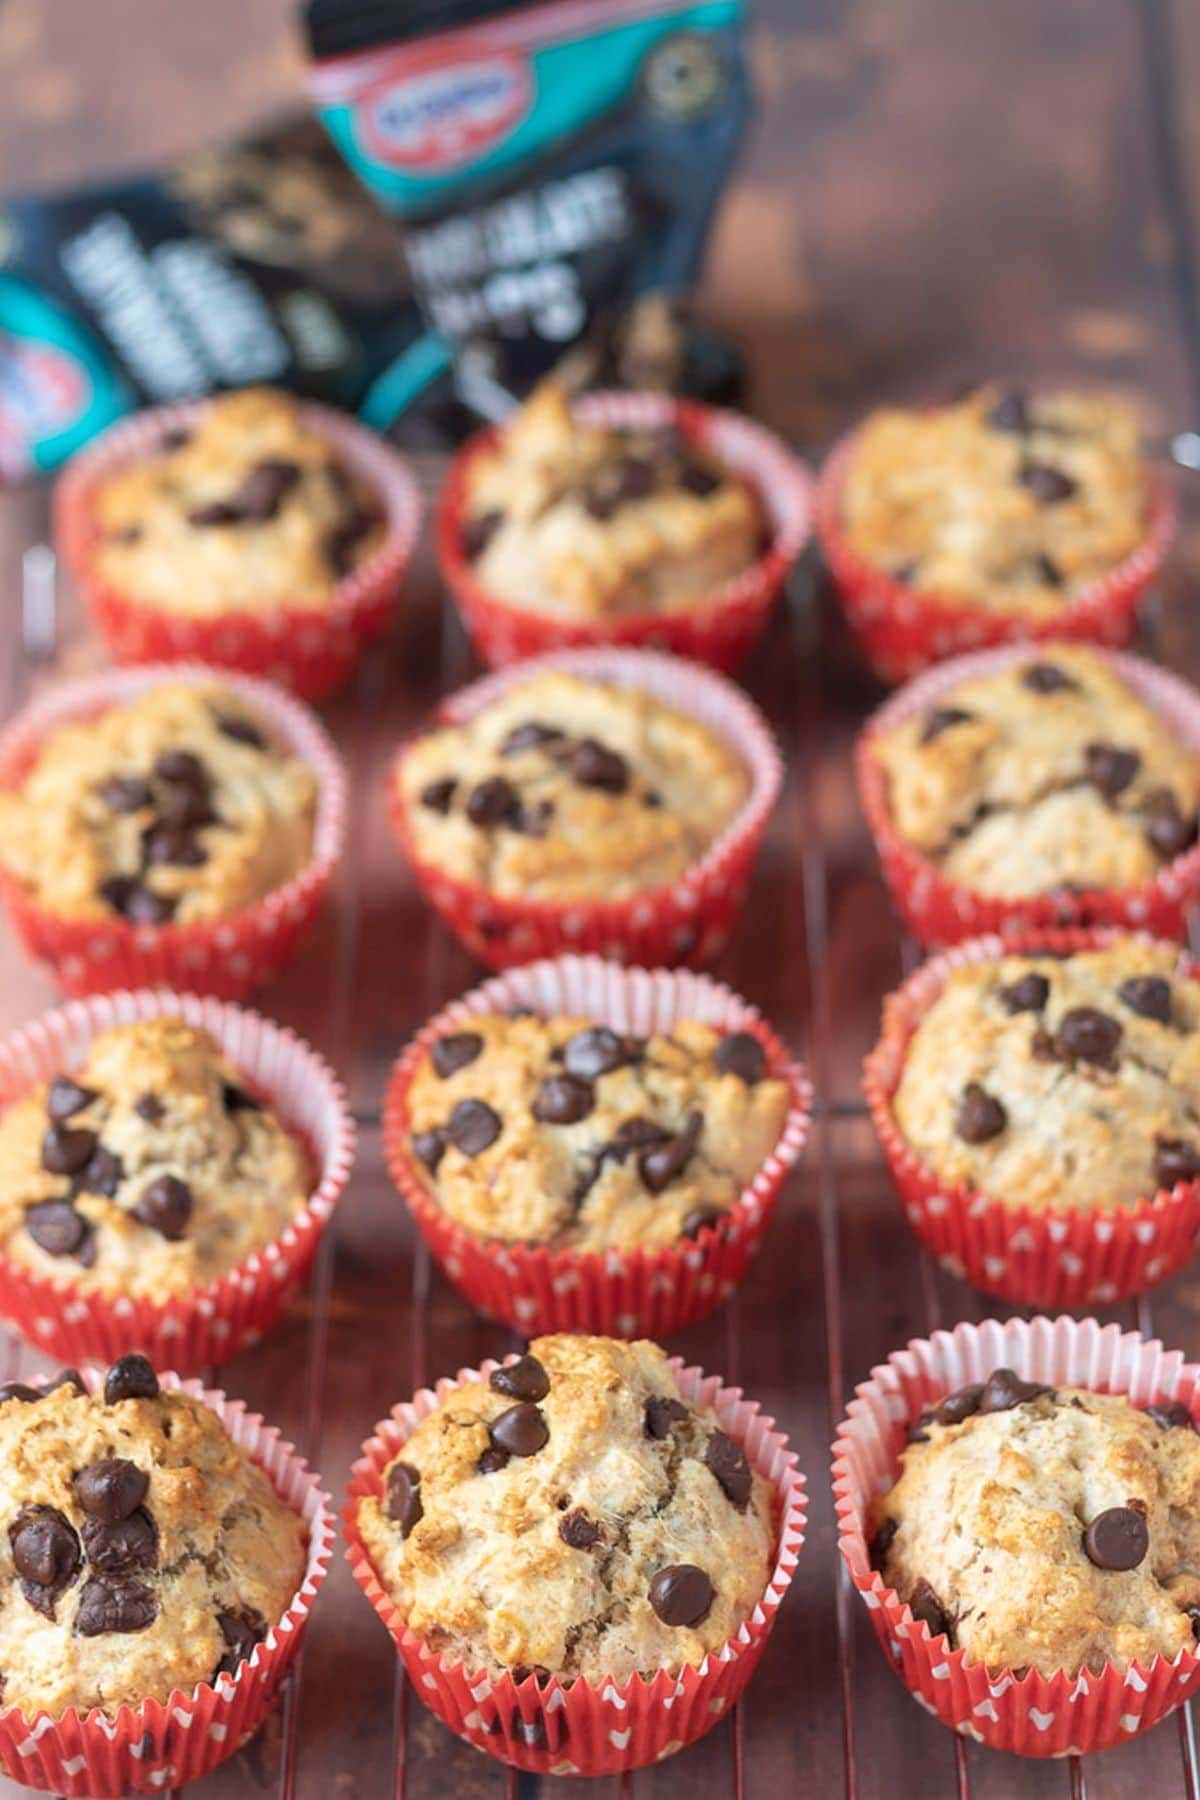 A baking rack of 12 sugar free wholemeal muffins with chocolate chips.